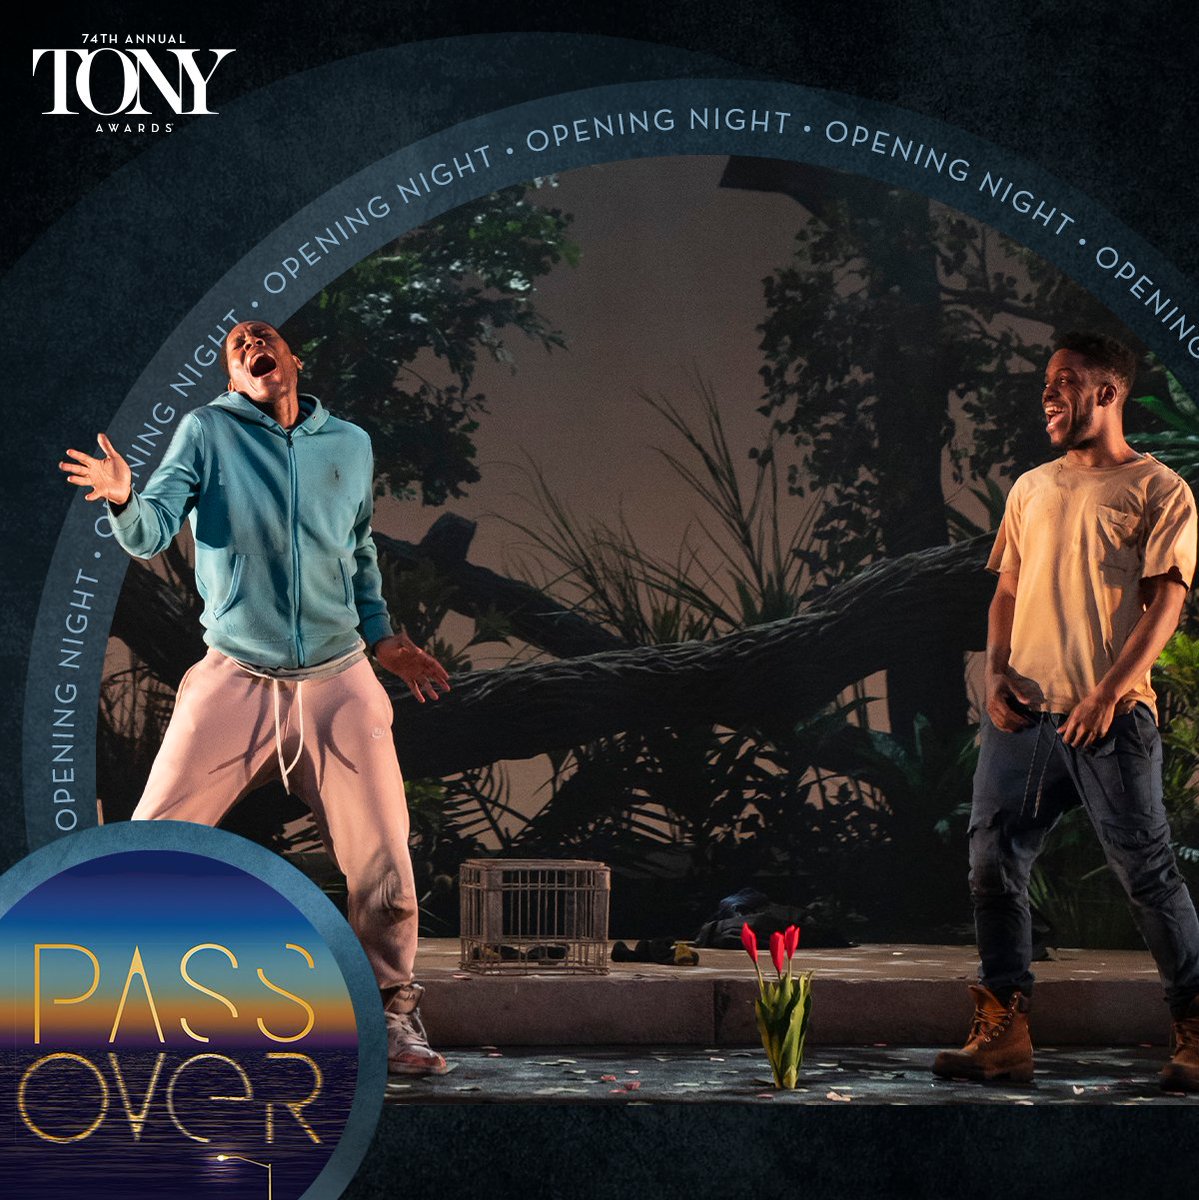 Happy #Broadway Opening to @PassOverBway! The new play by @anwandu bows at the August Wilson Theatre tonight.